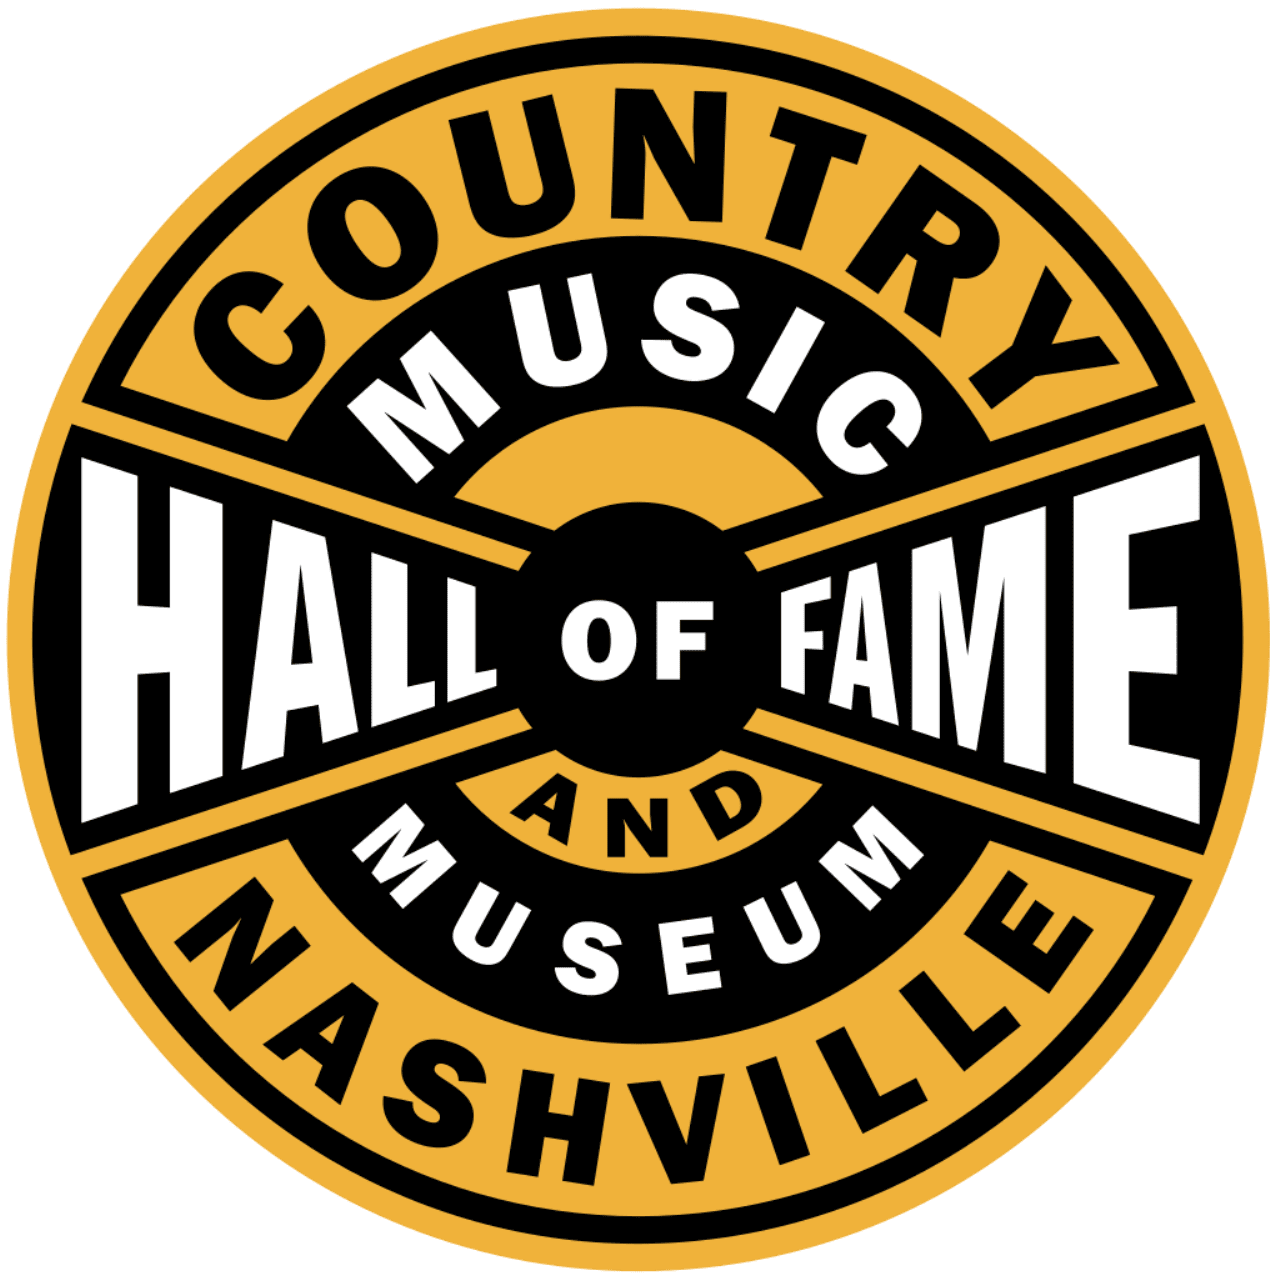 Country Music Hall of Fame logo